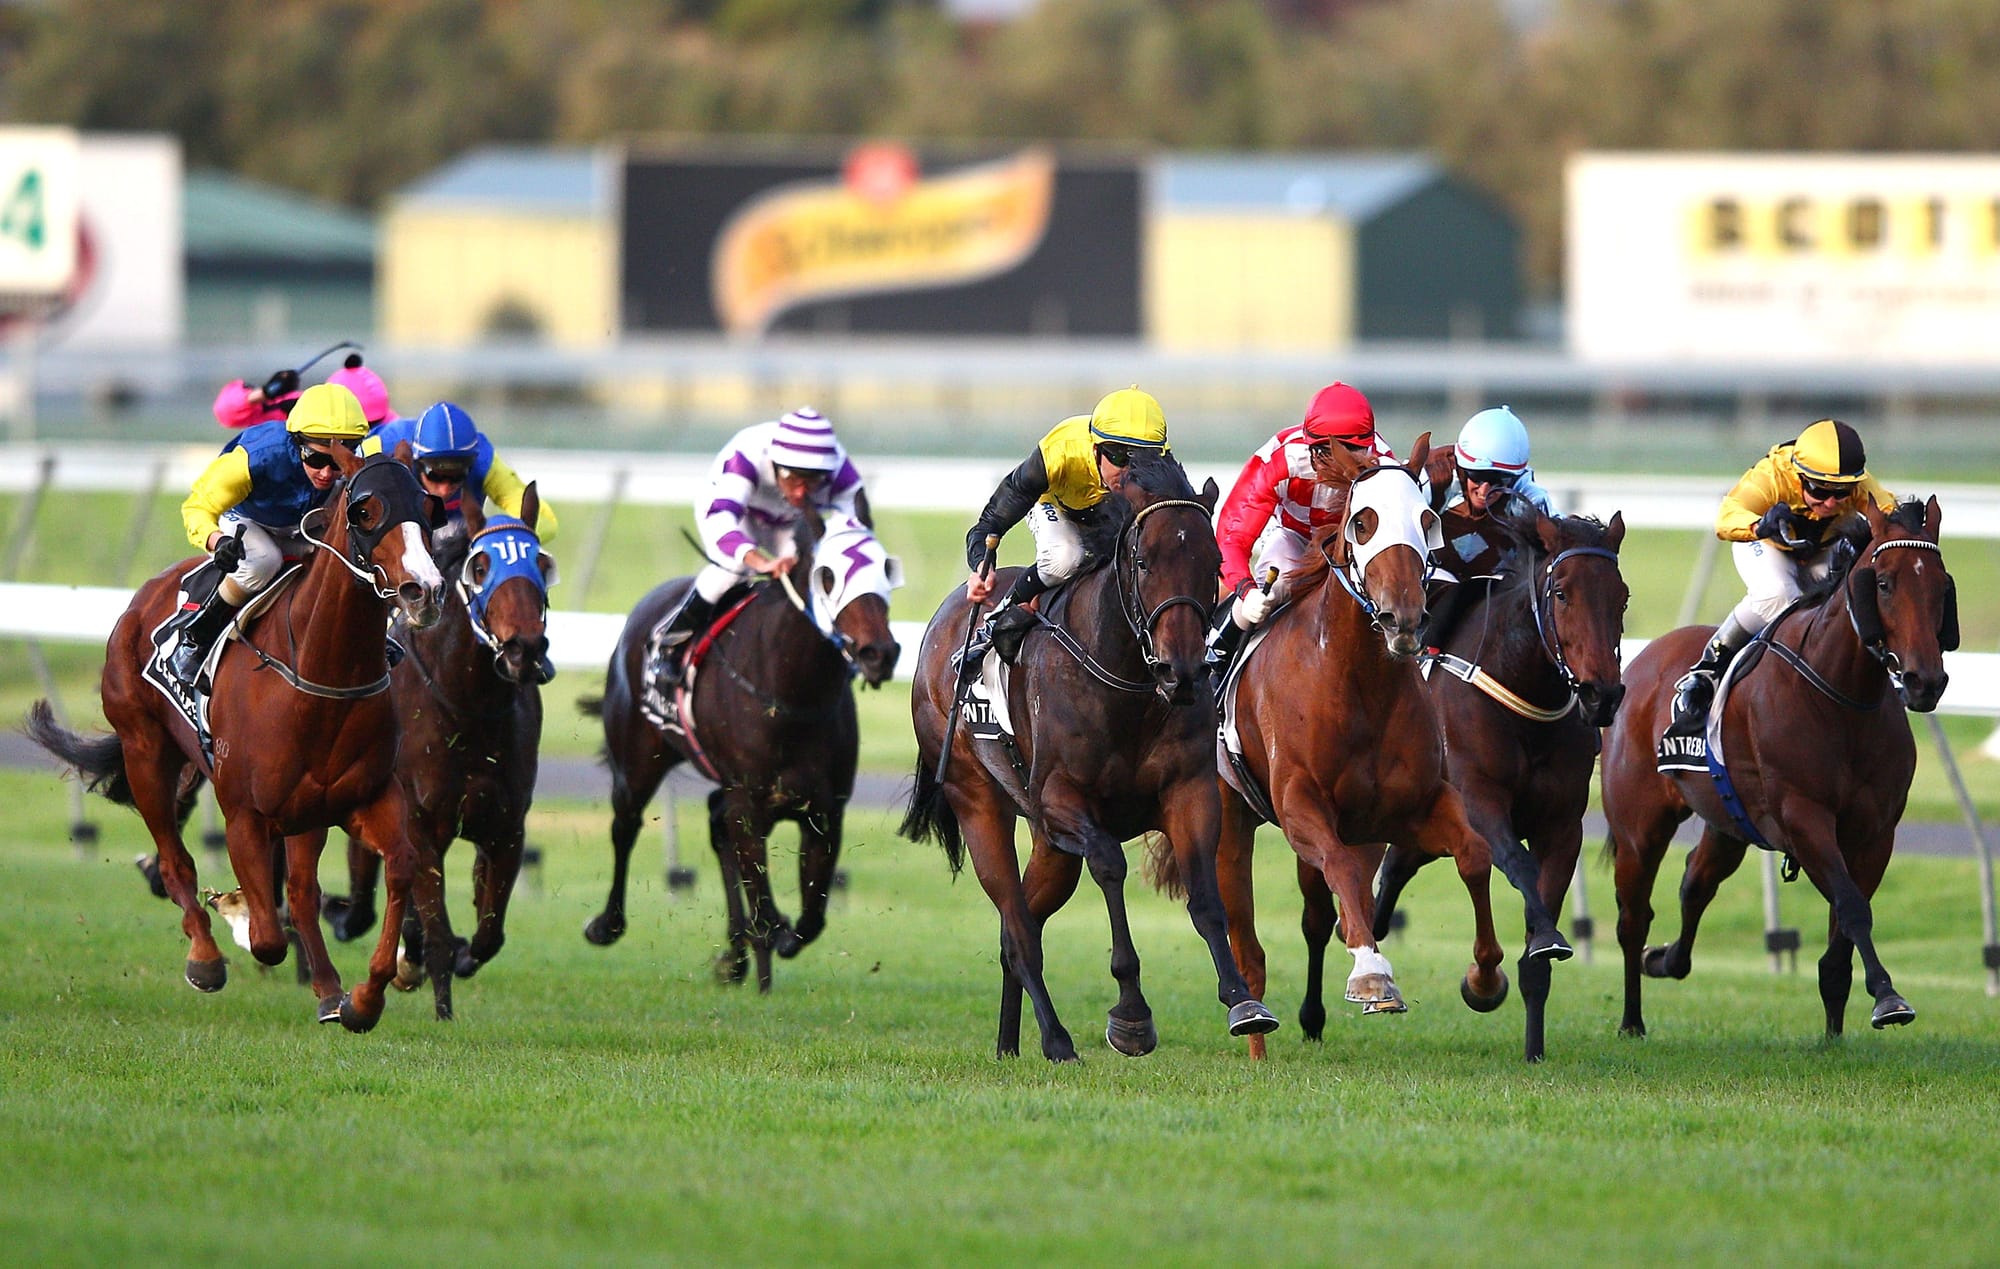 Racing contributes $500 million to the South Australian economy, according to an industry-commissioned report. (Photo by Mark Dadswell/Getty Images)